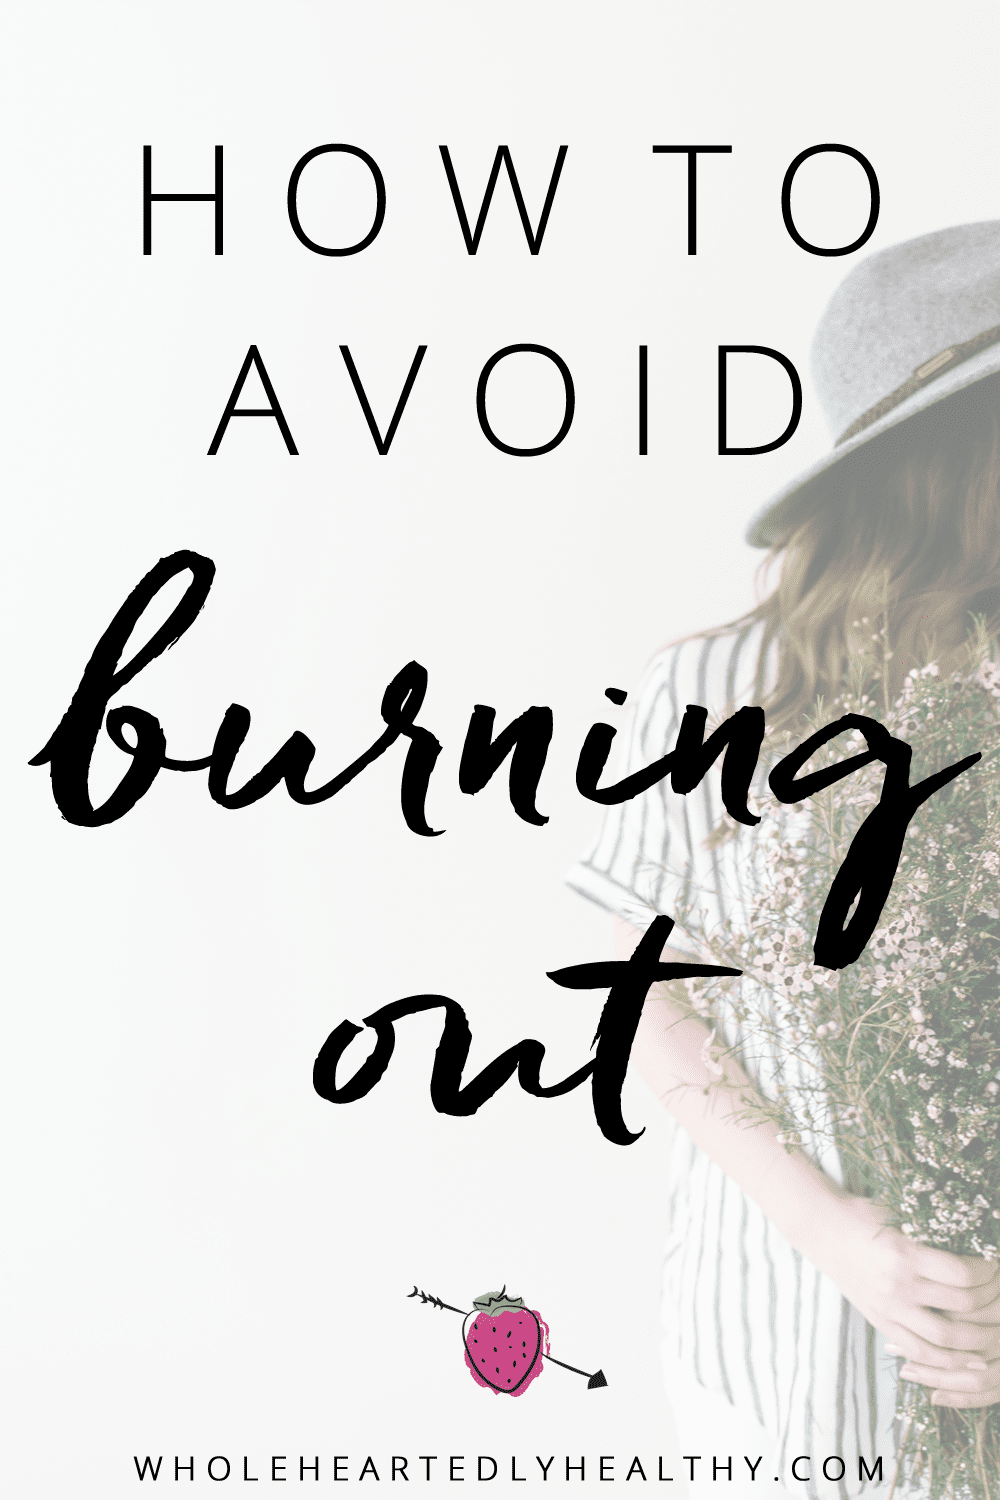 How to avoid burning out